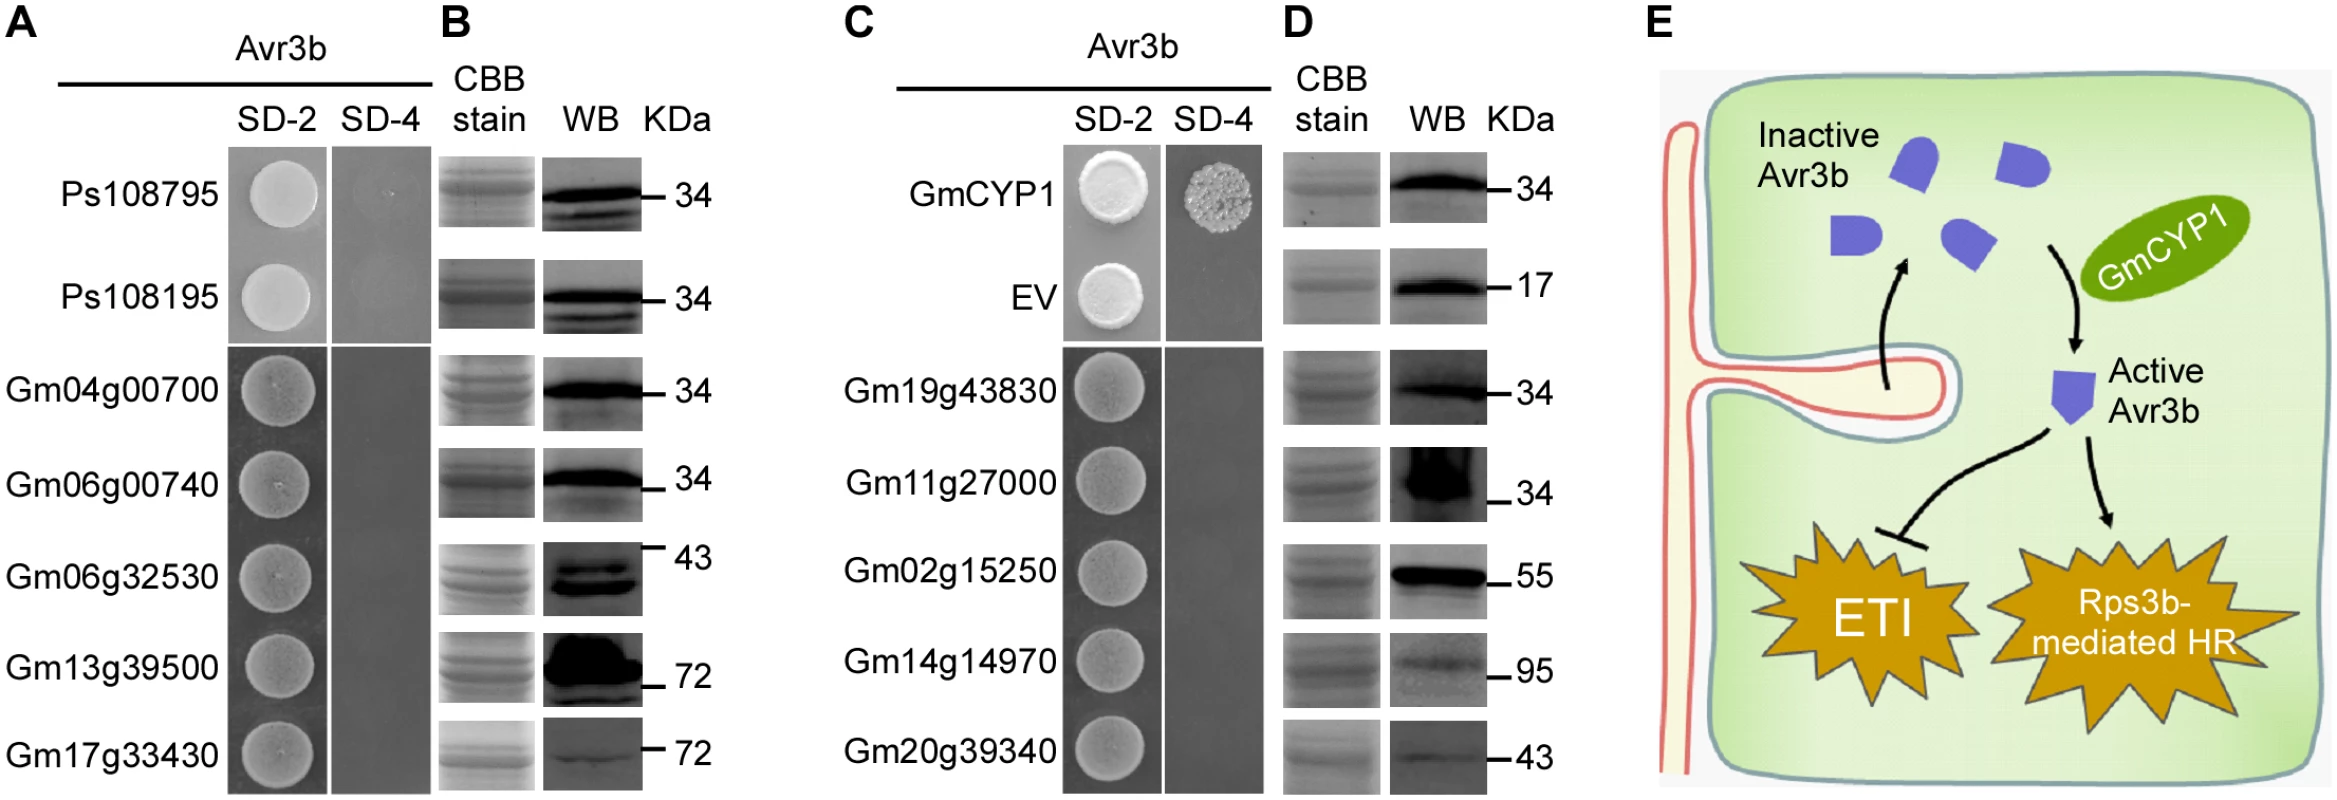 Avr3b specifically interacts with GmCYP1 in soybean.